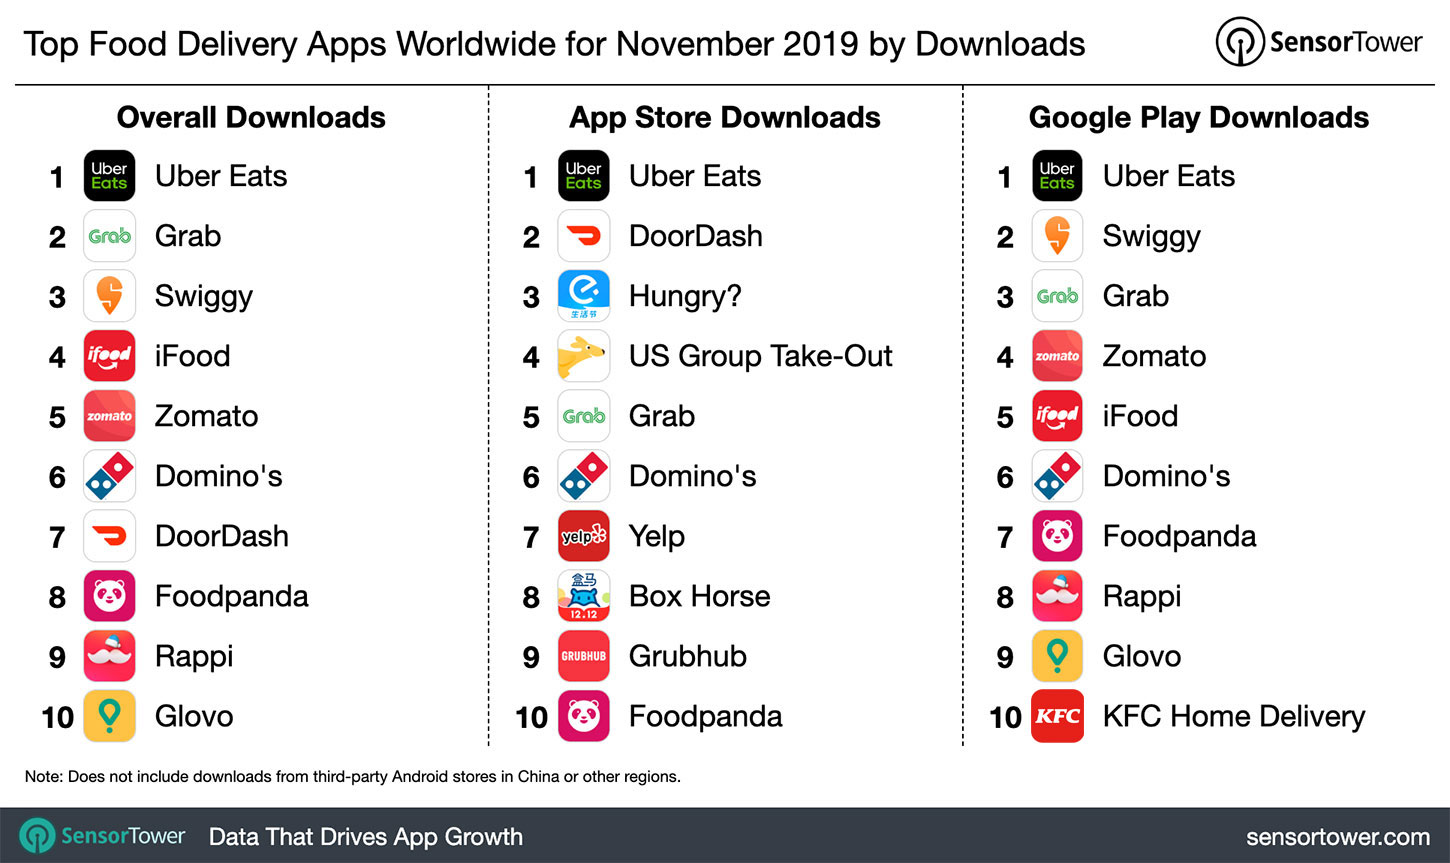 Top Food Delivery Apps Worldwide for November 2019 by Downloads